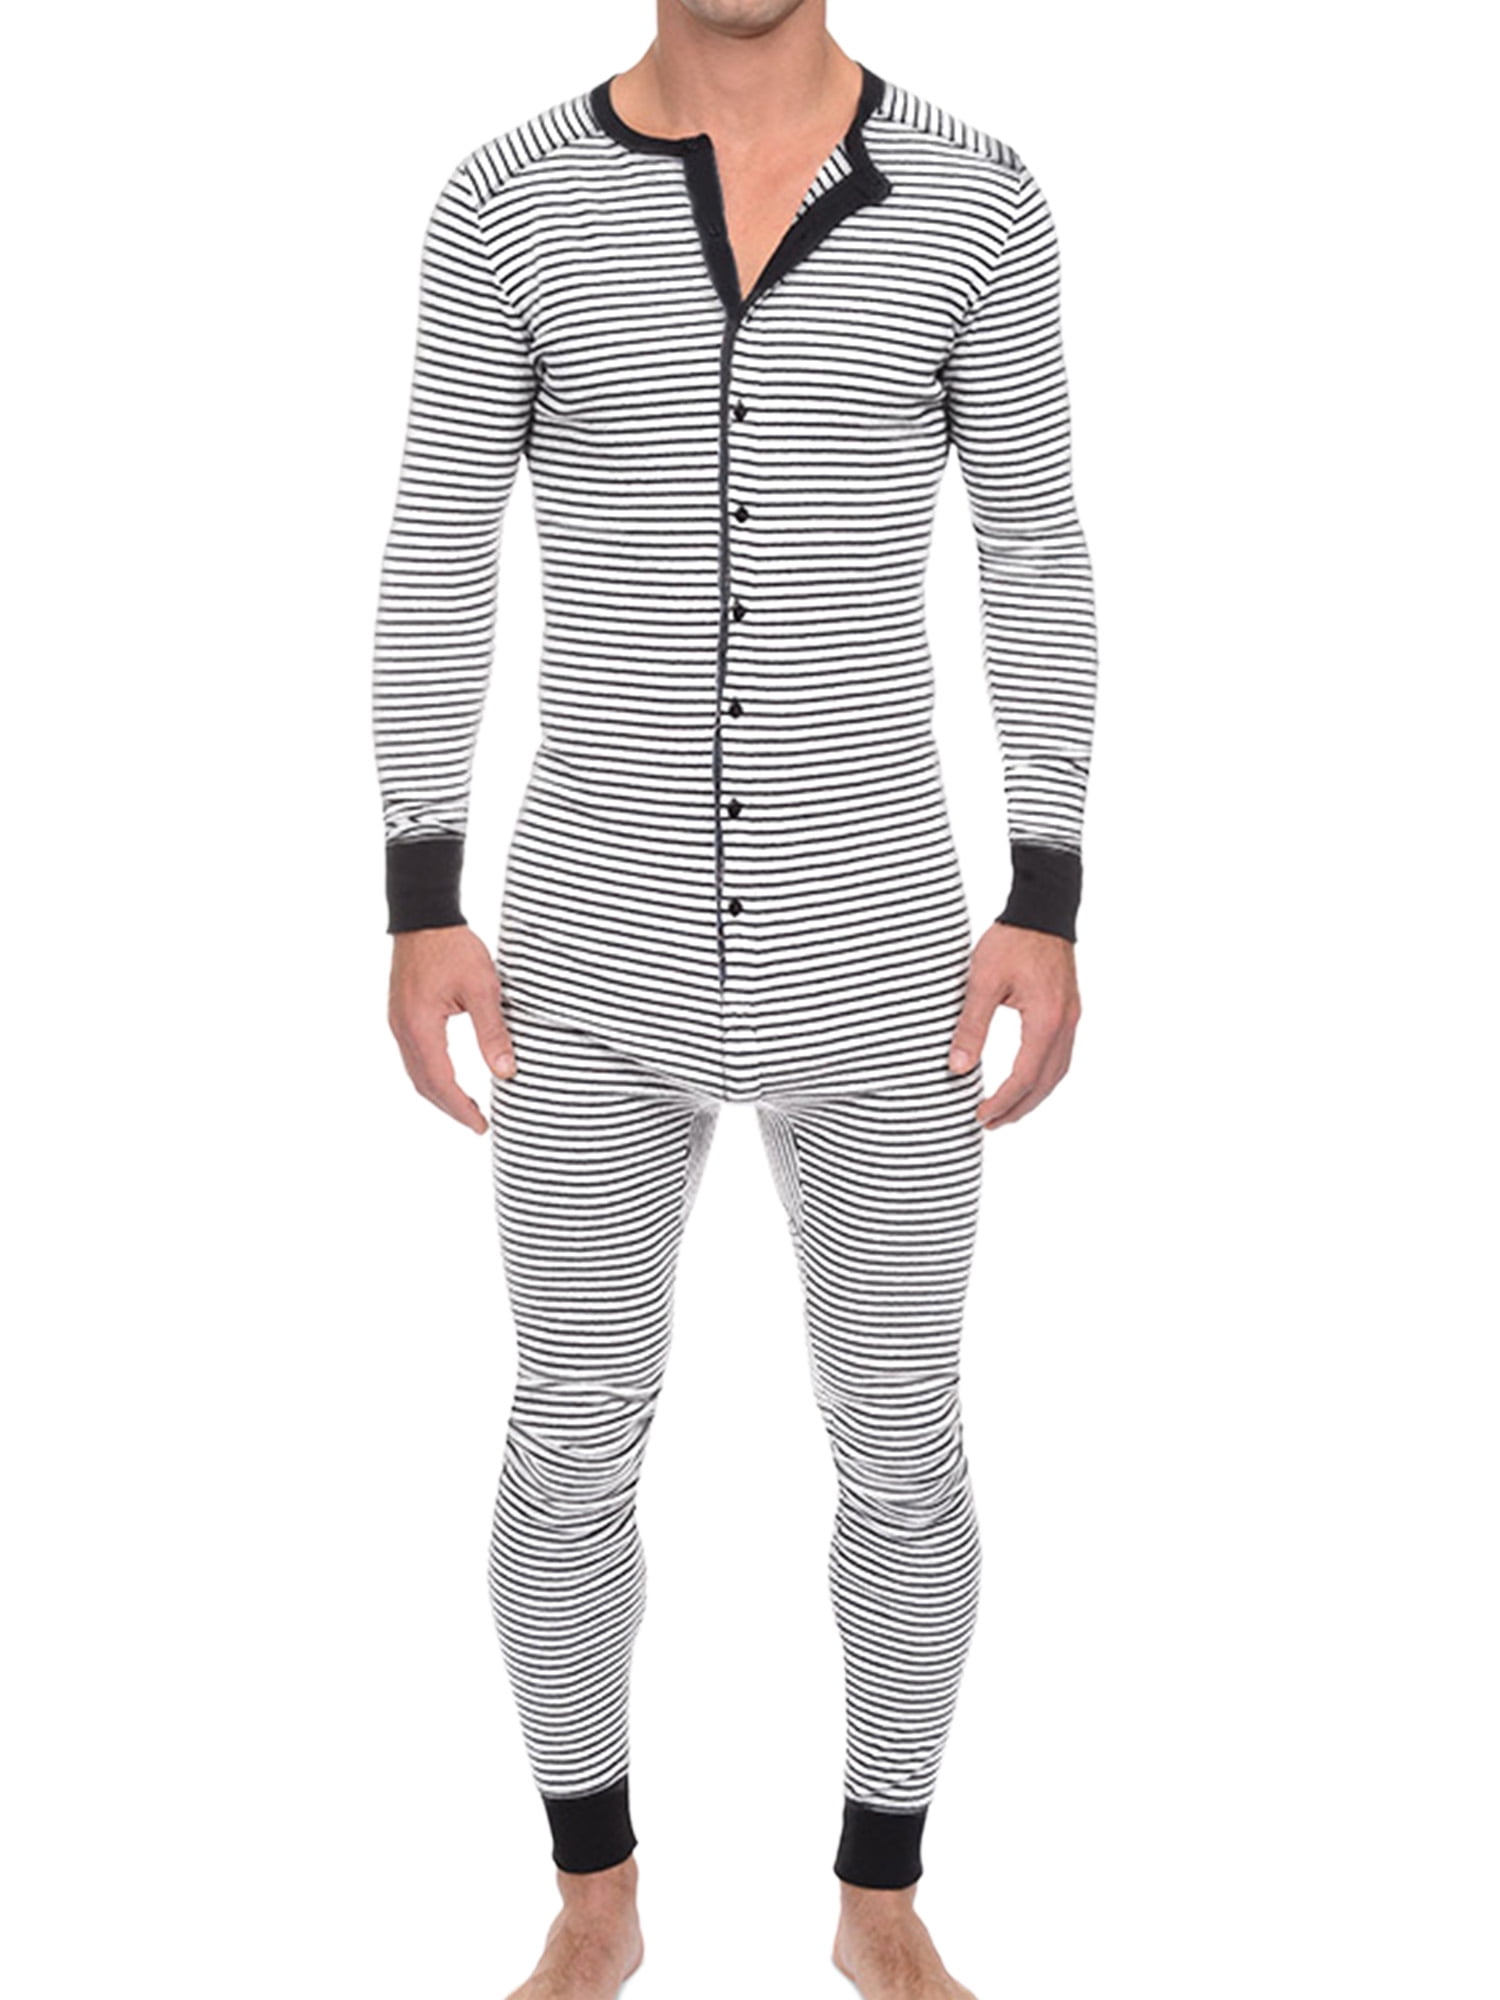 MENS BASELAYER THERMAL JUMPSUIT ALL IN ONE UNDERWEAR PLAYSUIT ZIP UP BODYSUIT 